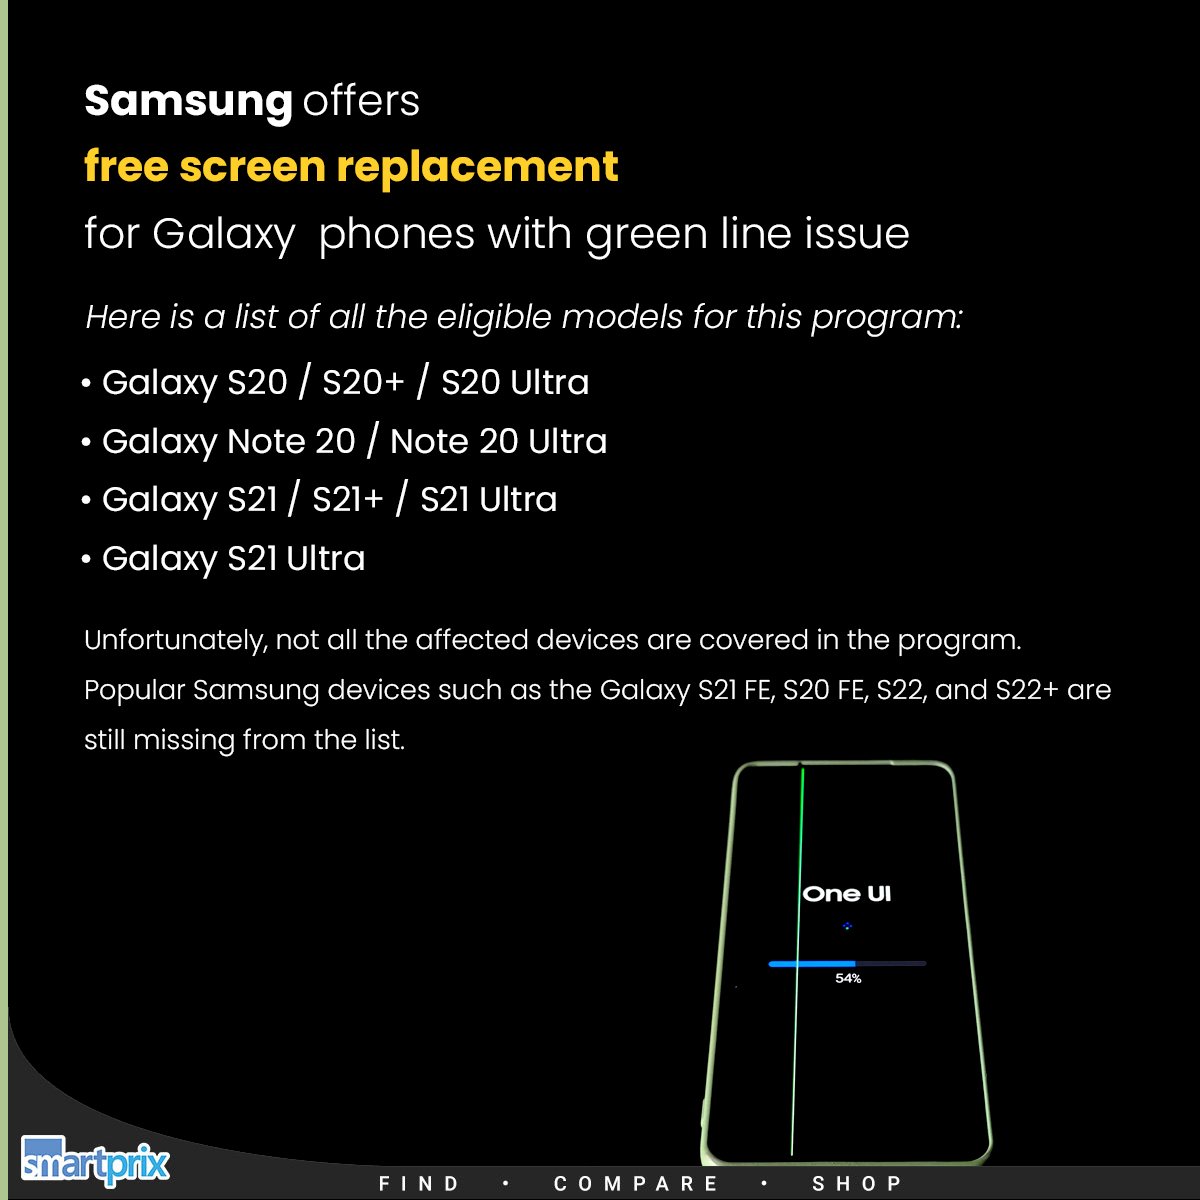 Good News! Samsung is now offering free replacements to Galaxy S21, S22, Note 20 Users

#Samsung #SamsungScreenReplacement #GalaxyS21 #GreenLineIssue